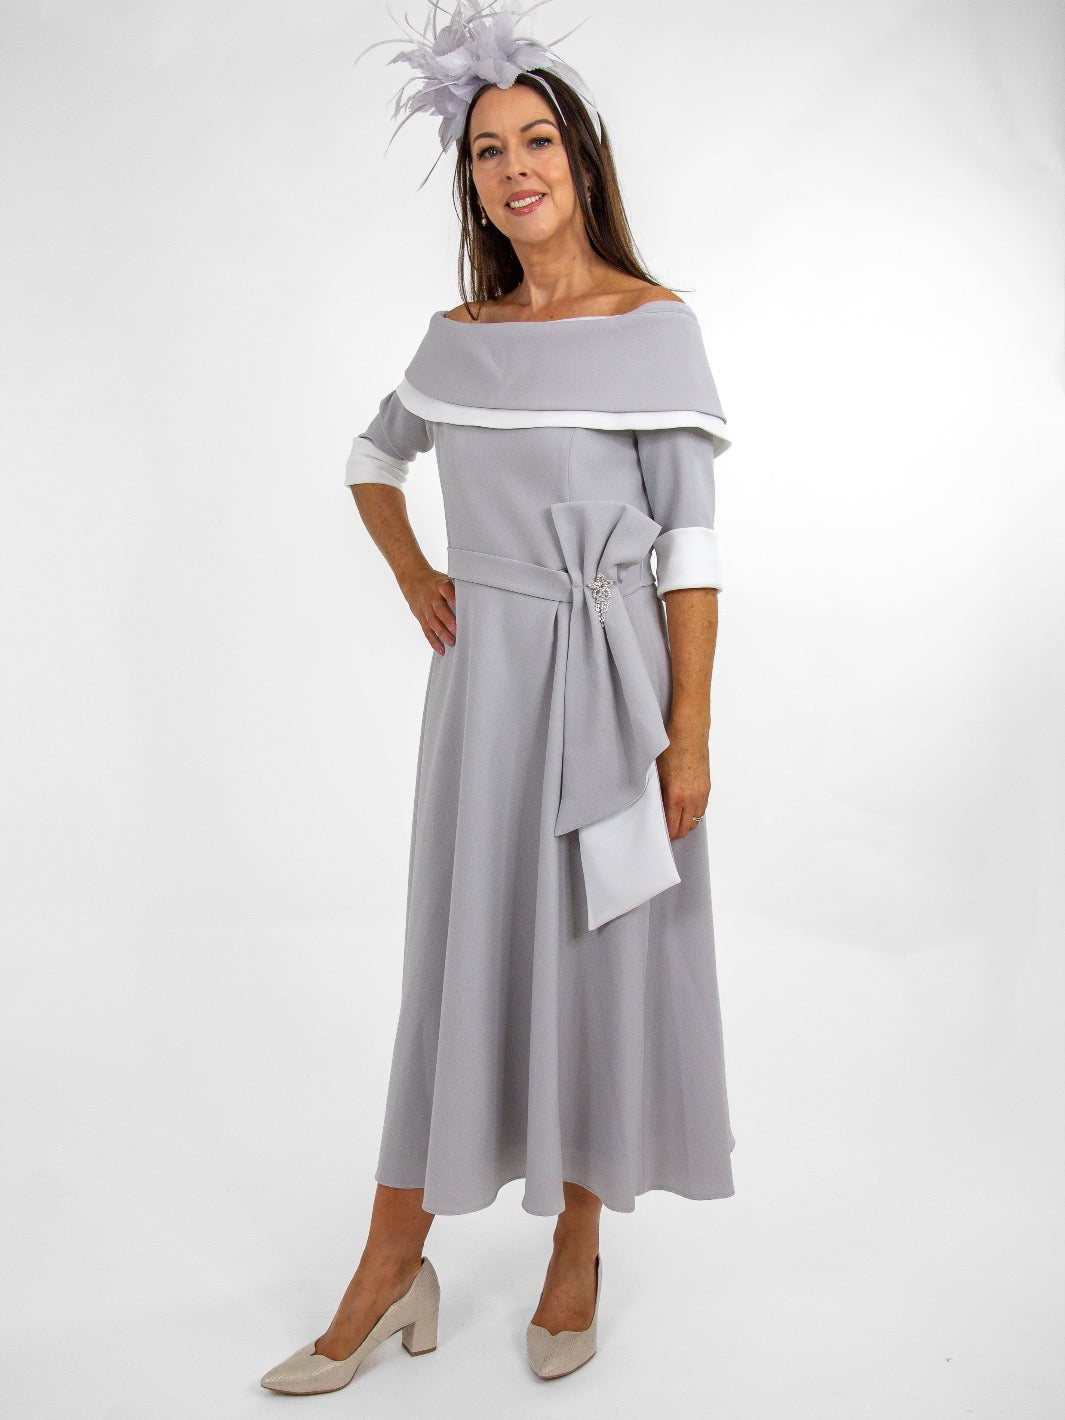 Claudia C Sylvia Dress In Grey / White-Occasion Wear-Guest of the wedding-Nicola Ross